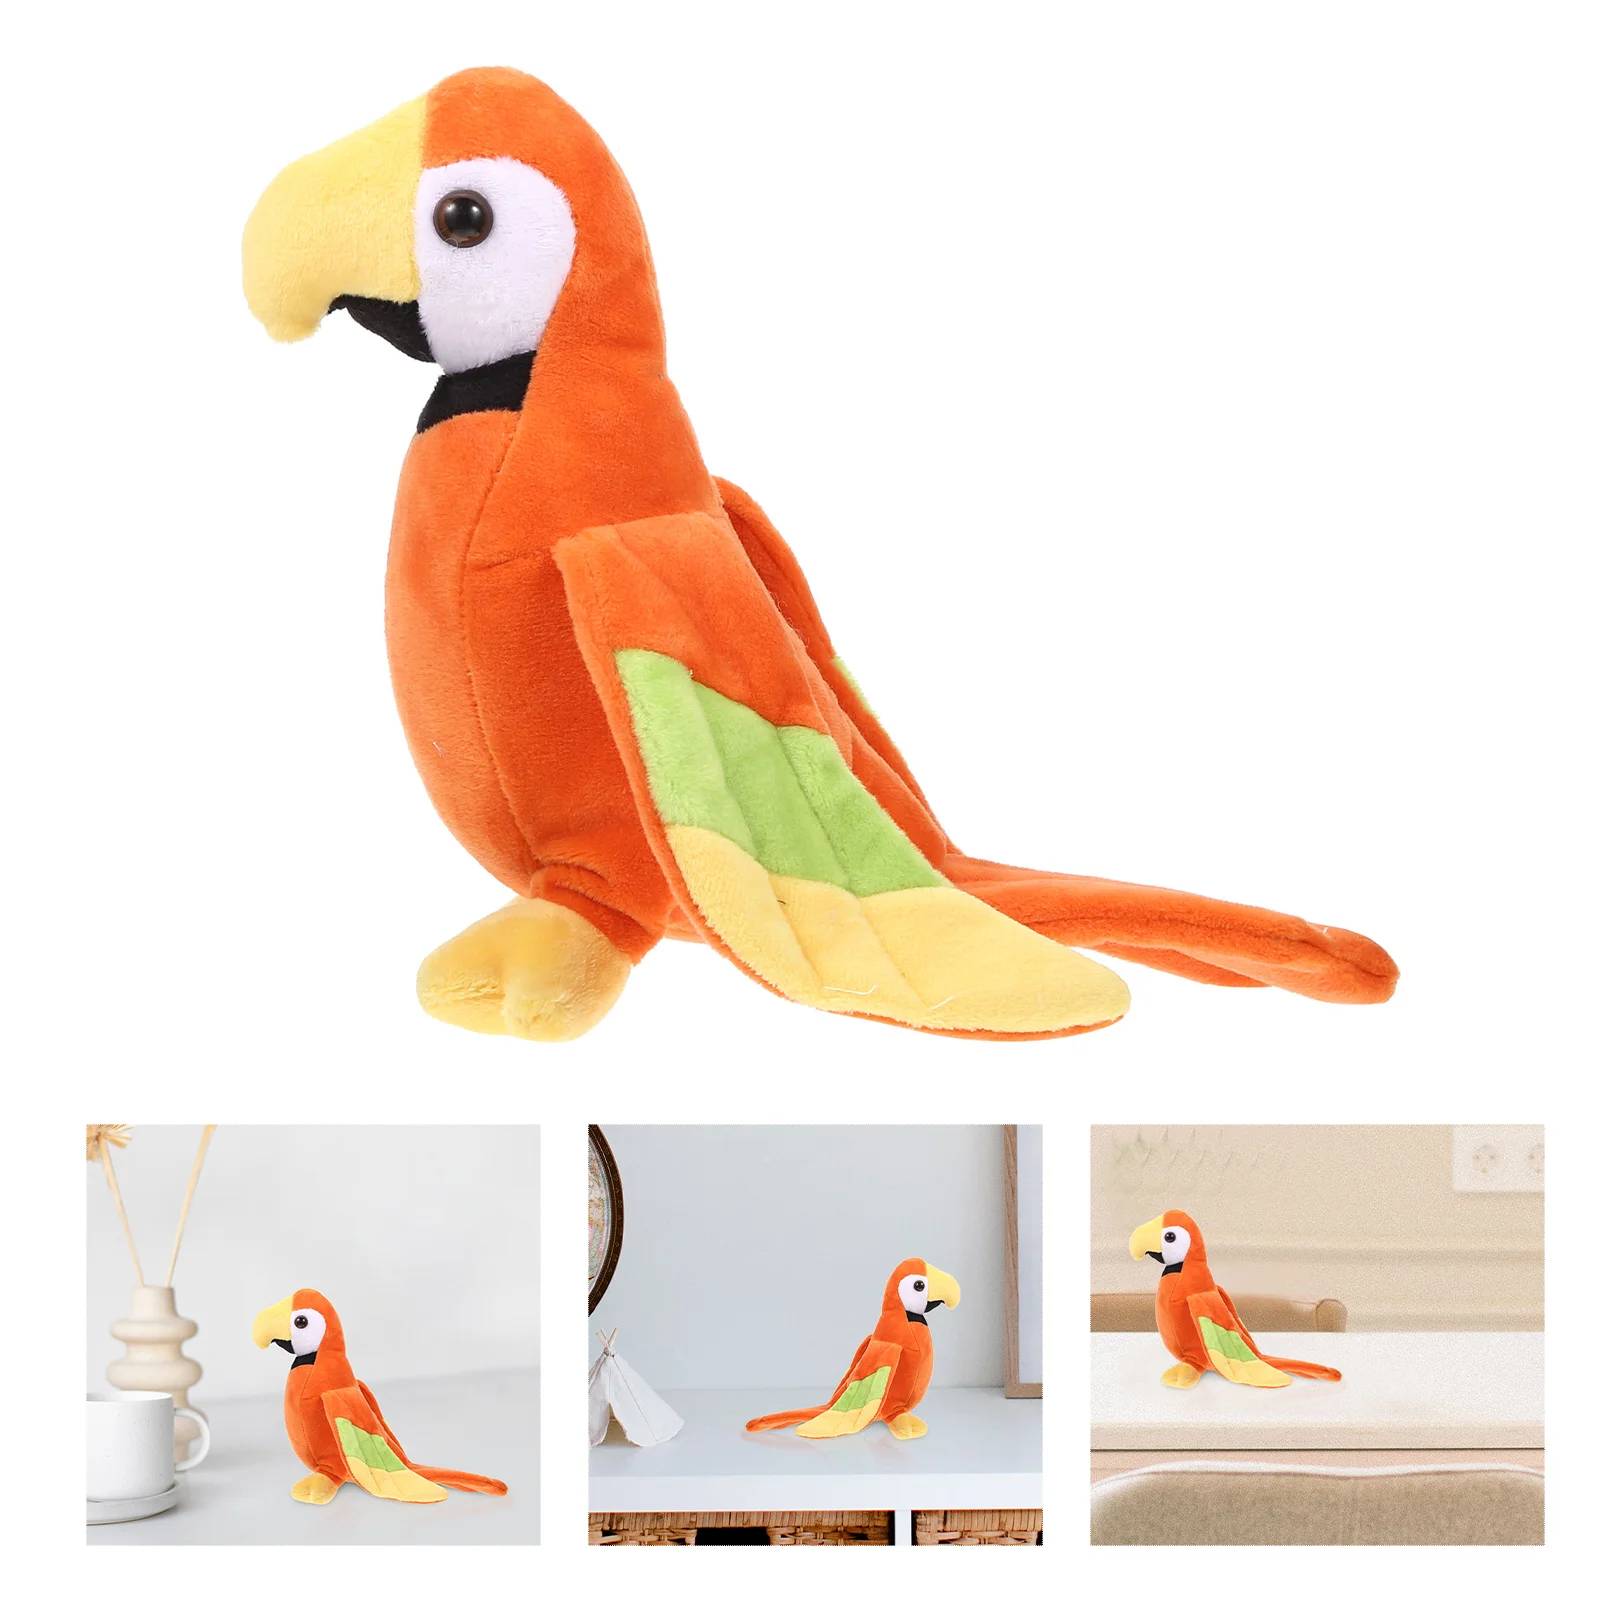 

Simulation Color Parrot Imitation Toy Decorative Children Toys Kids Birthday Present Animal Plush Fluffy Adorable Talking for